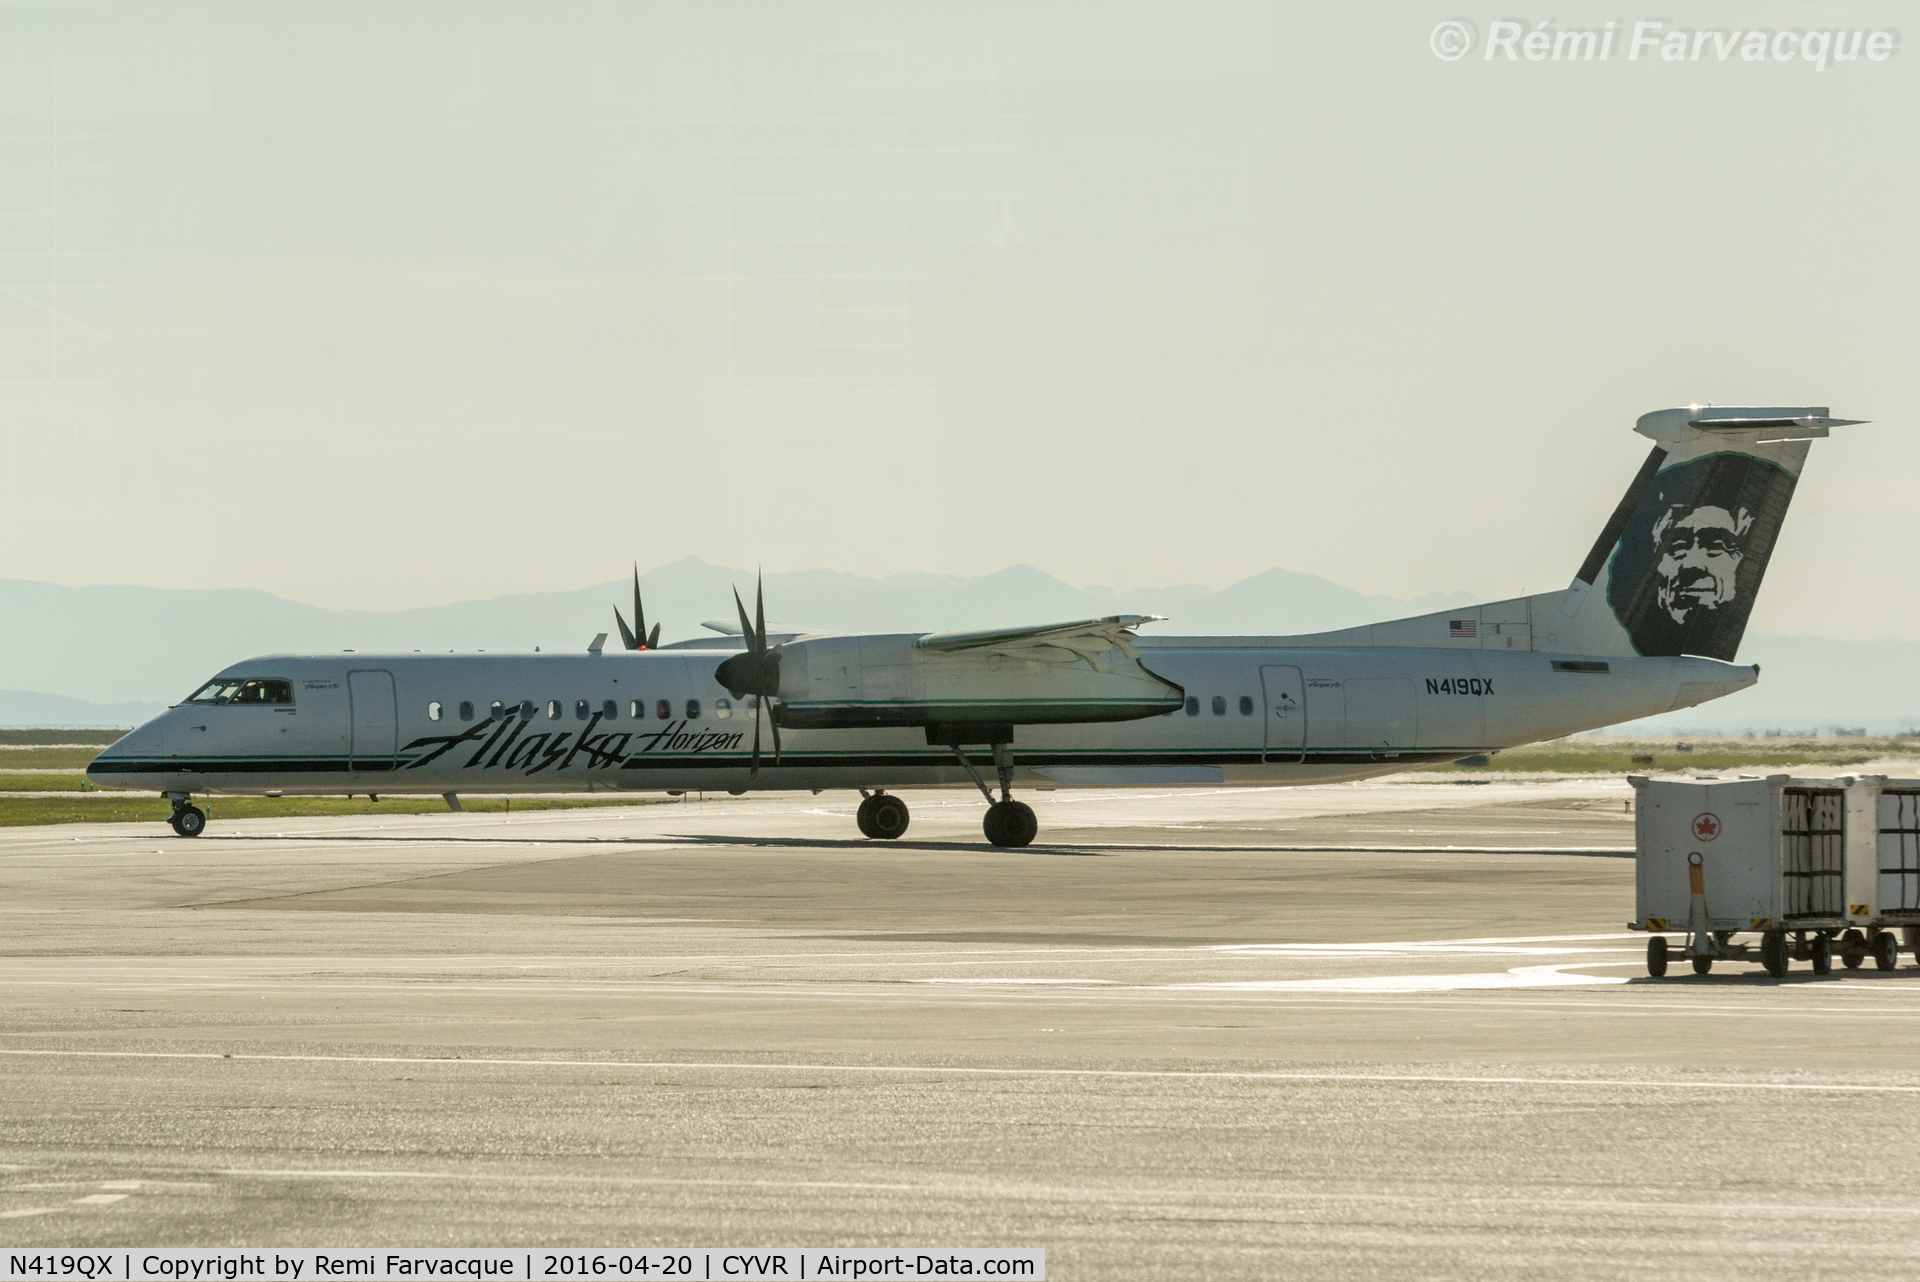 N419QX, 2007 De Havilland Canada DHC-8-402 Dash 8 C/N 4145, Taxiing to south runways. Spotted in the same place yesterday.